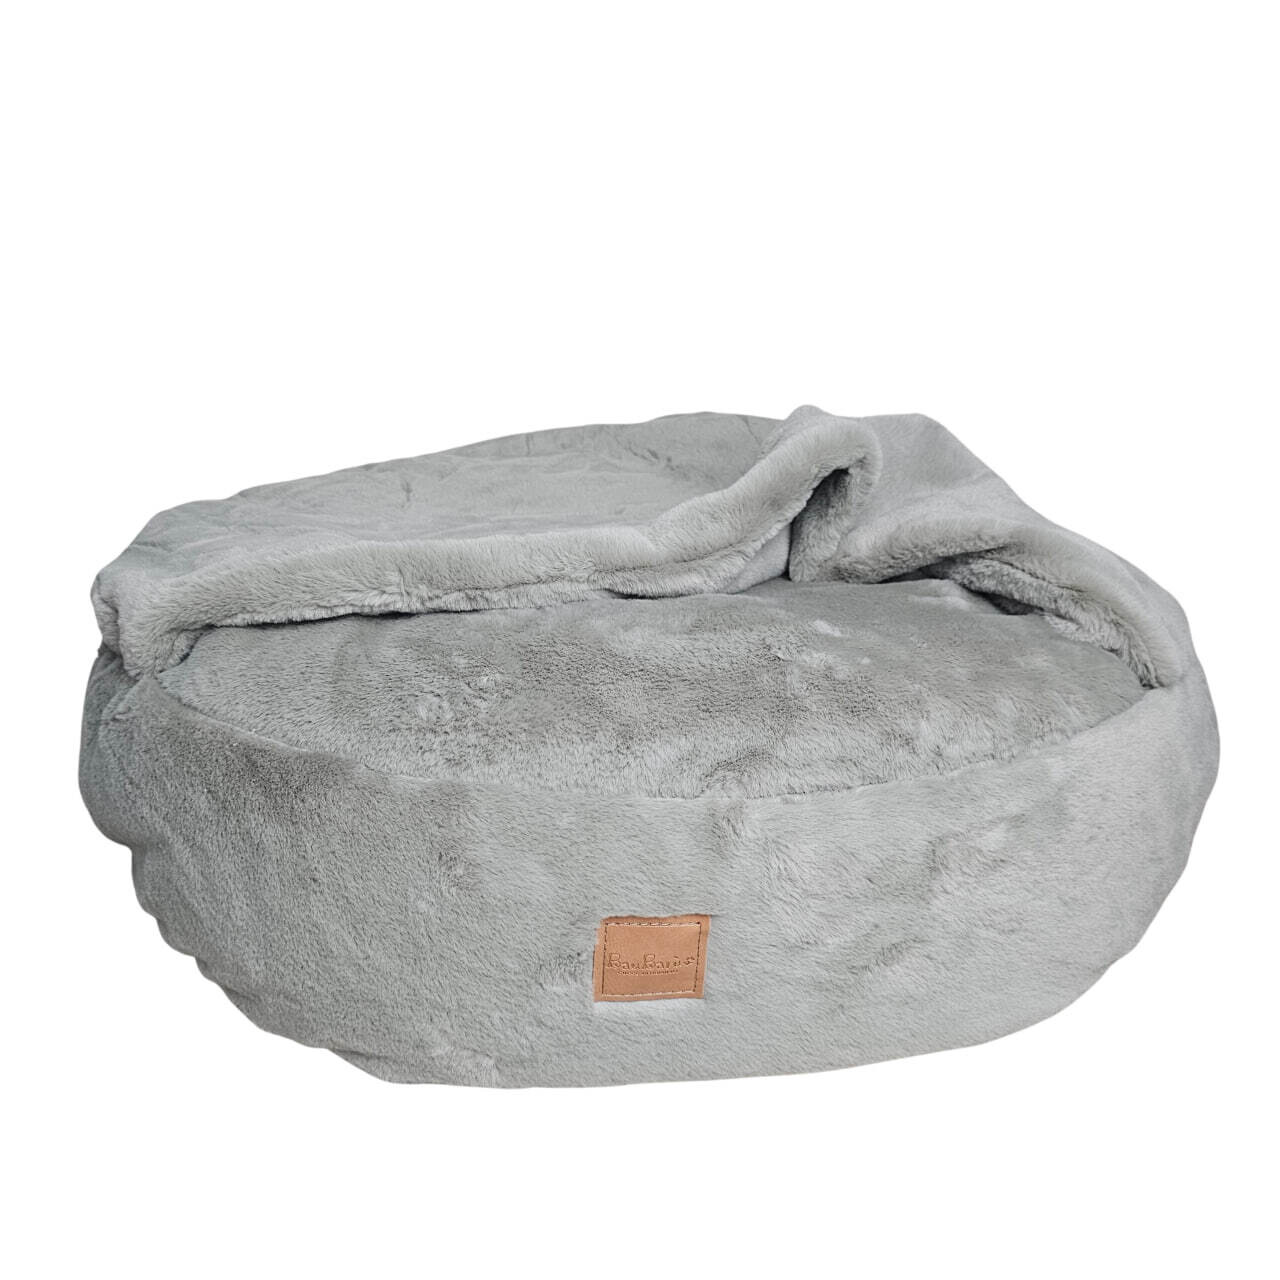 Cave bed Castorino soft green - Stock, Size: 65cm